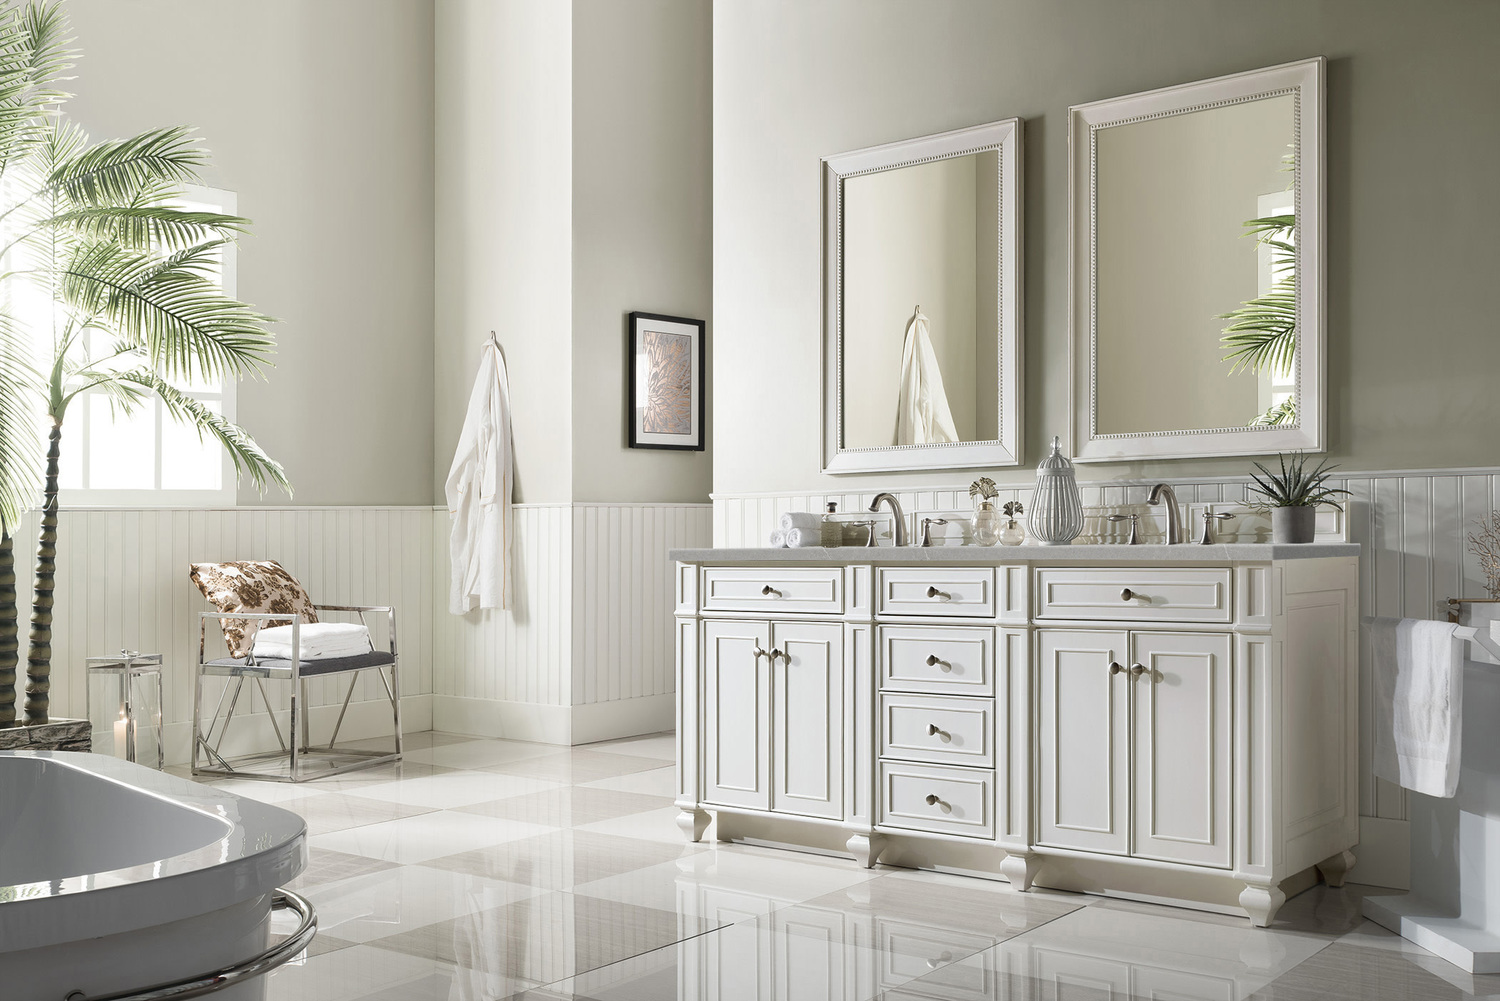 used bathroom cabinets James Martin Vanity Bright White Transitional